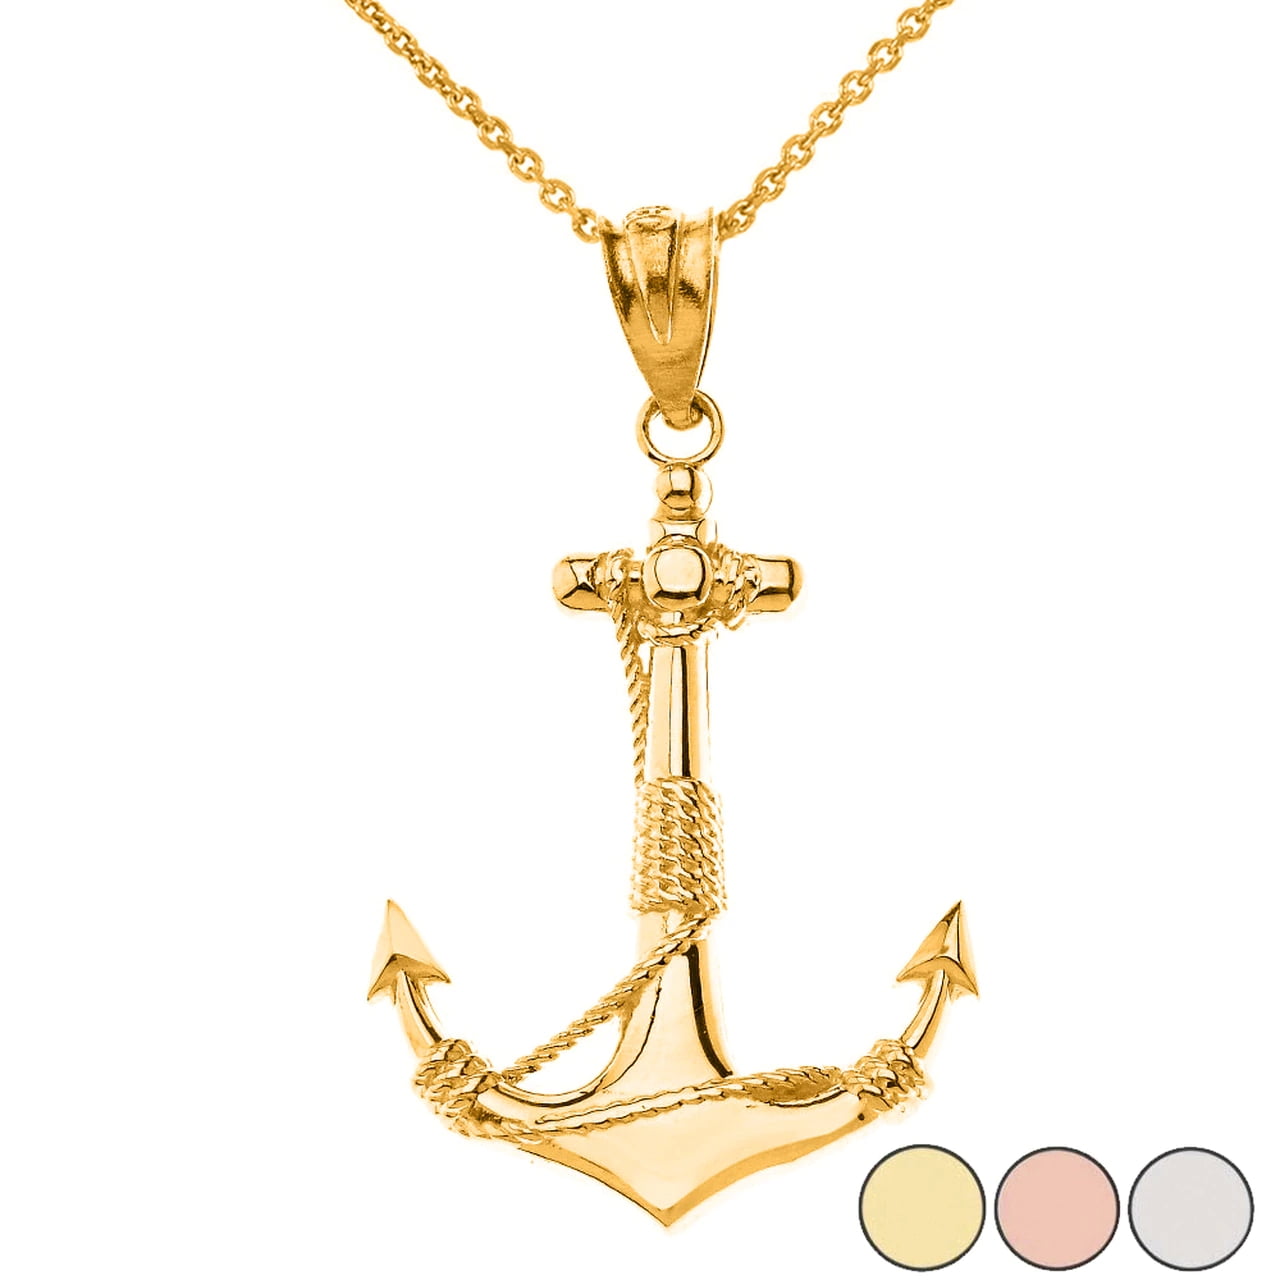 Anchor Cross Nautical Charm Pendant with Chain Necklace 14K Solid White Gold 